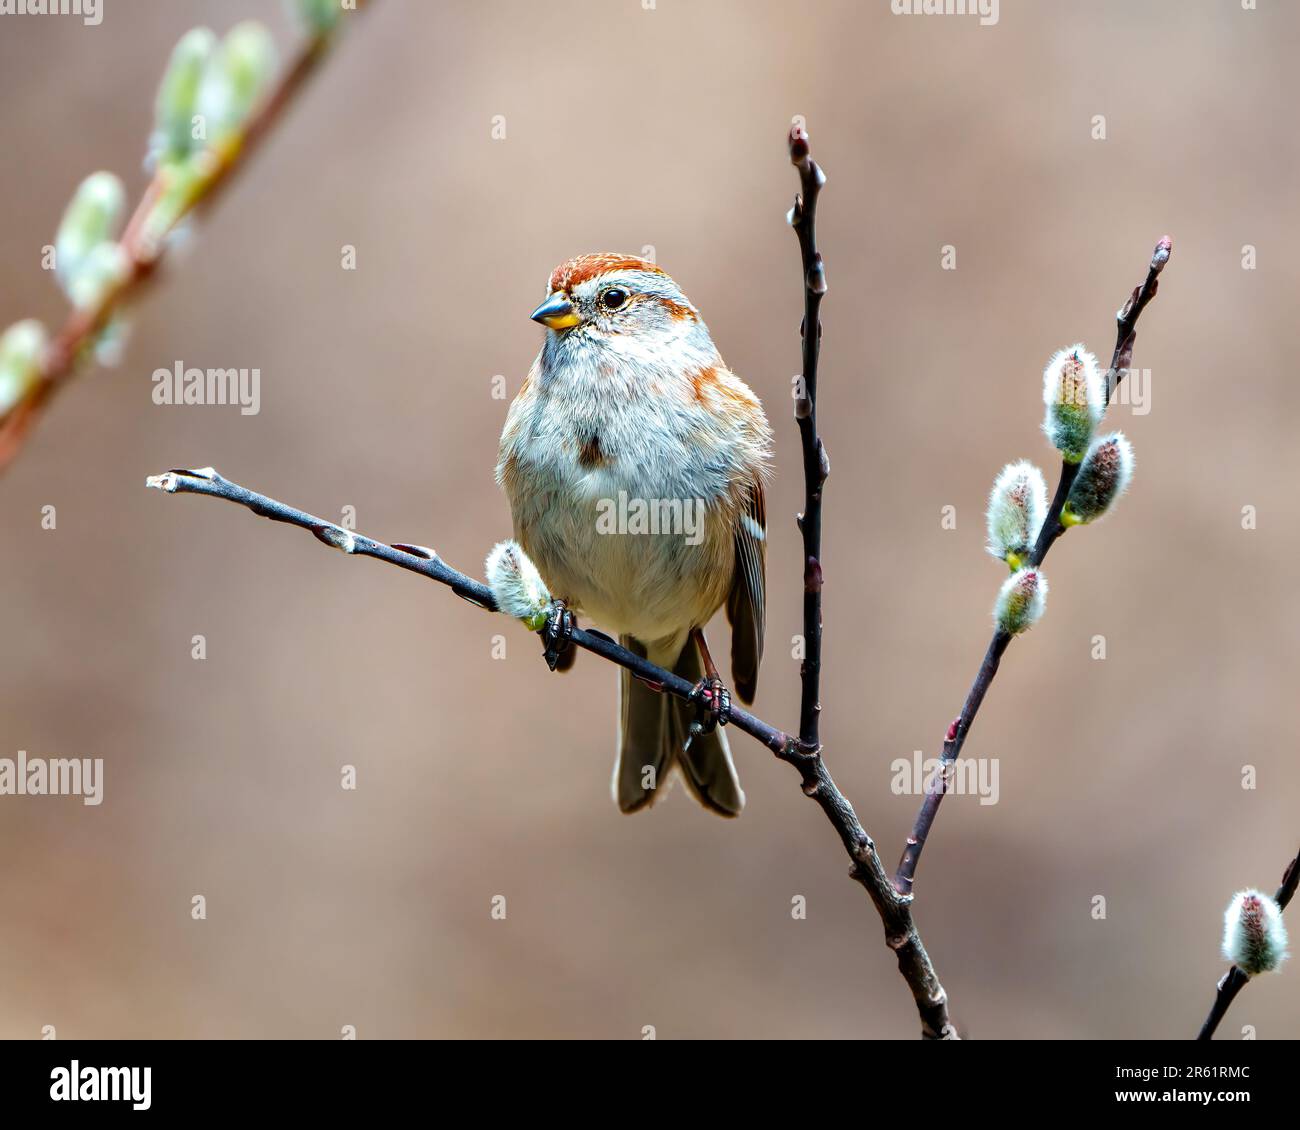 American Tree Sparrow close-up front view perched on a tree buds with brown background in its environment and habitat surrounding. Sparrow Picture. Stock Photo